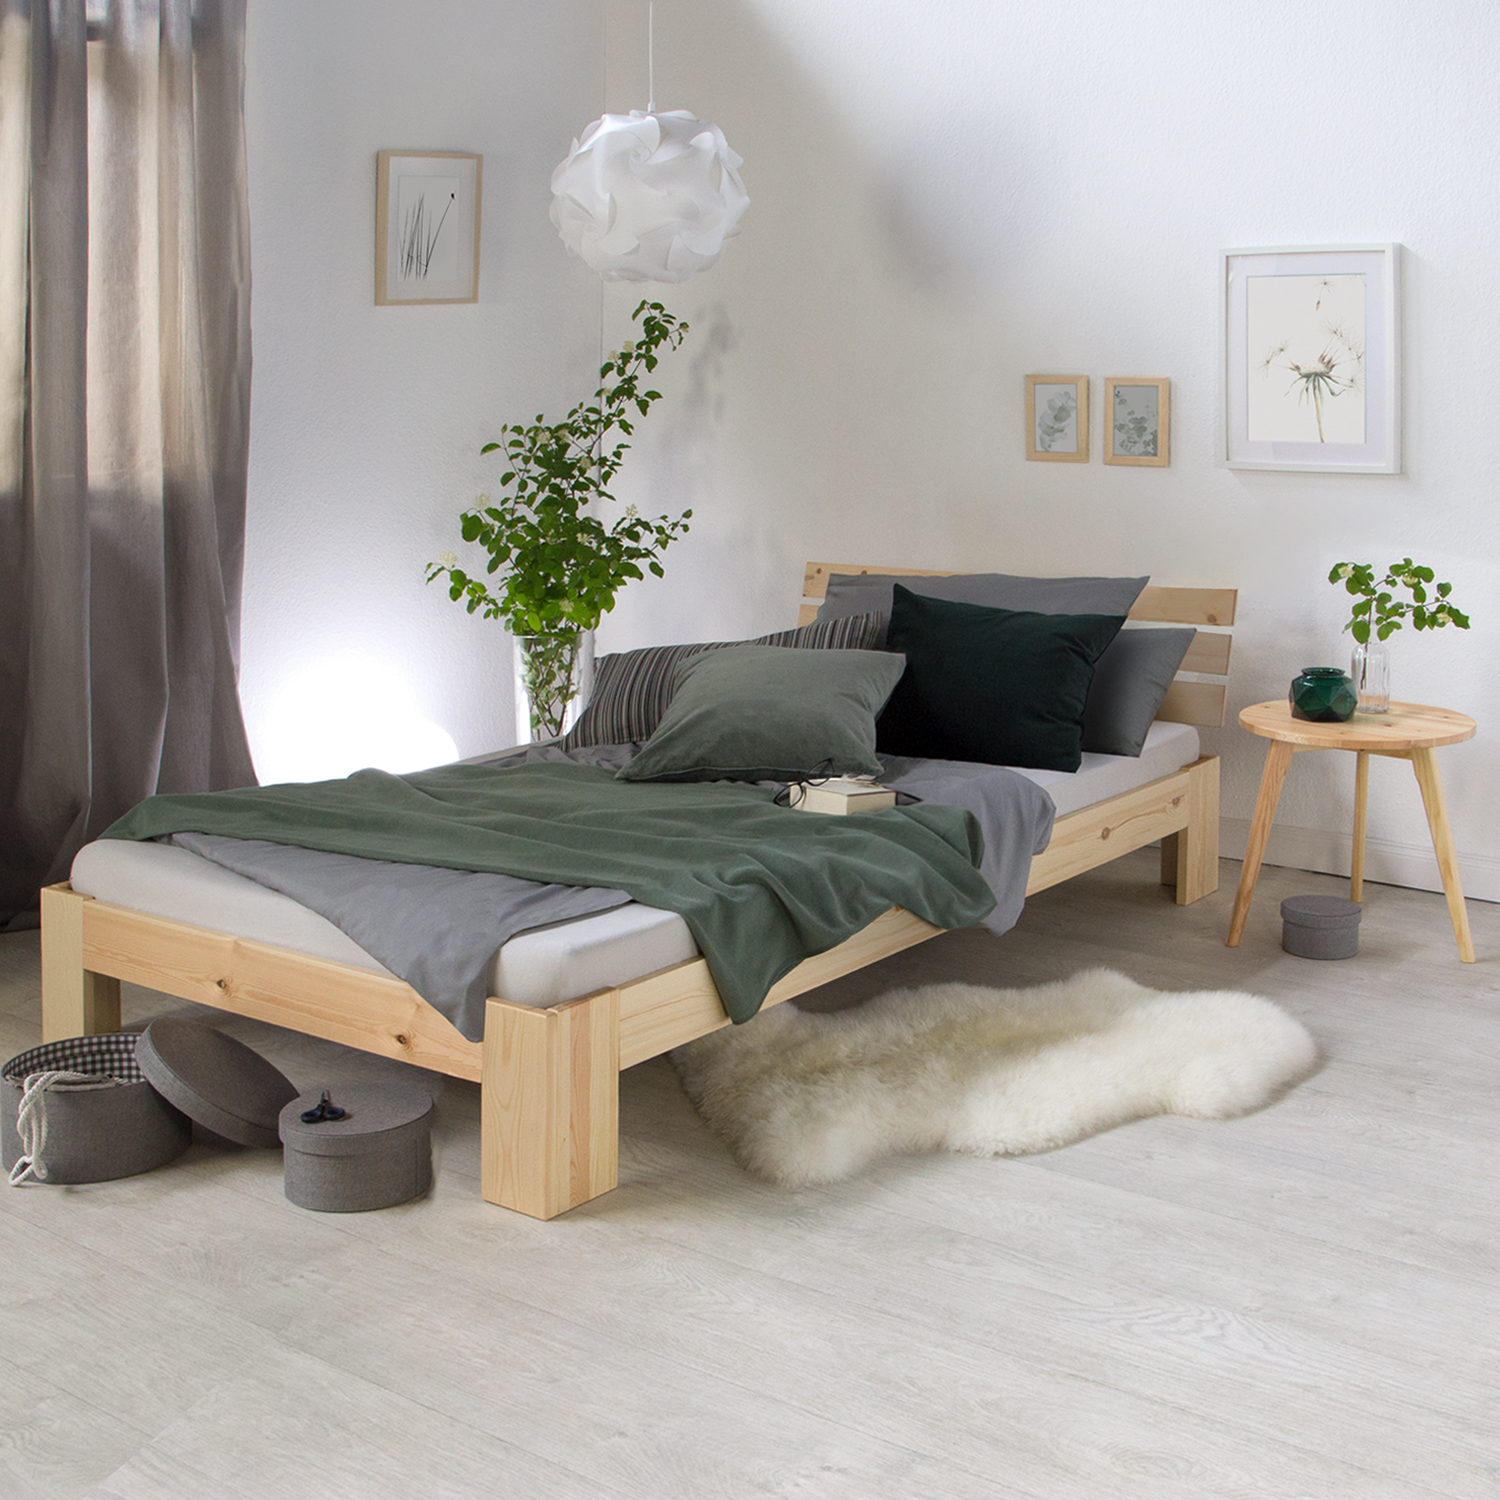 Wooden bed 90 120 140 160 180 cm white natural or grey double bed futon bed frame solid wood single bed